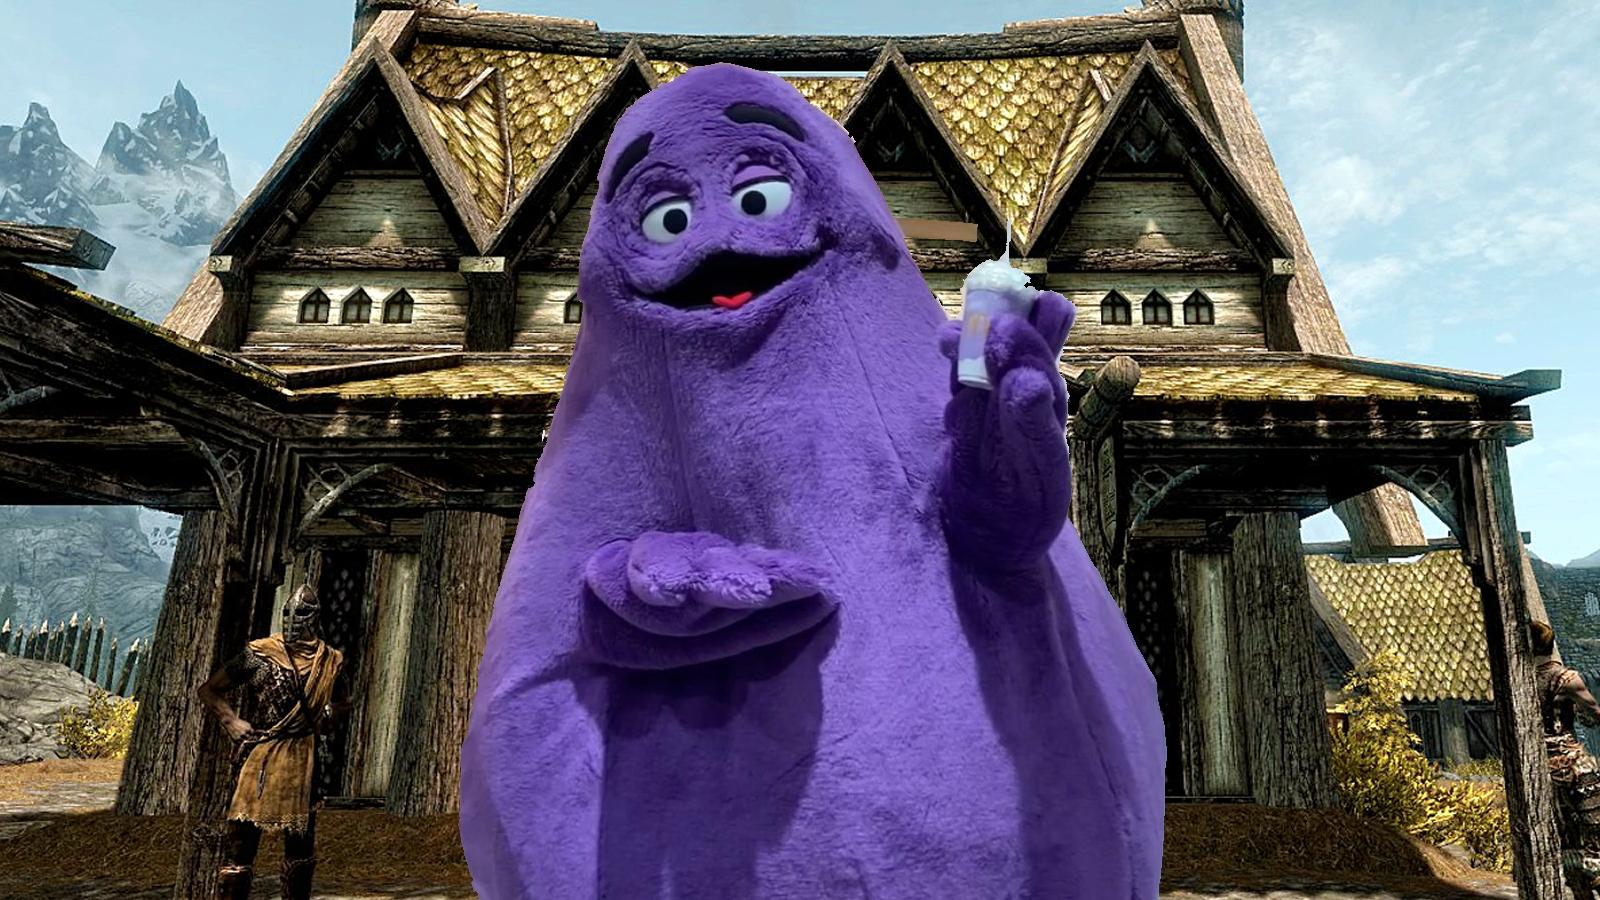 Grimace’s takeover continues as Skyrim mod introduces the purple shake